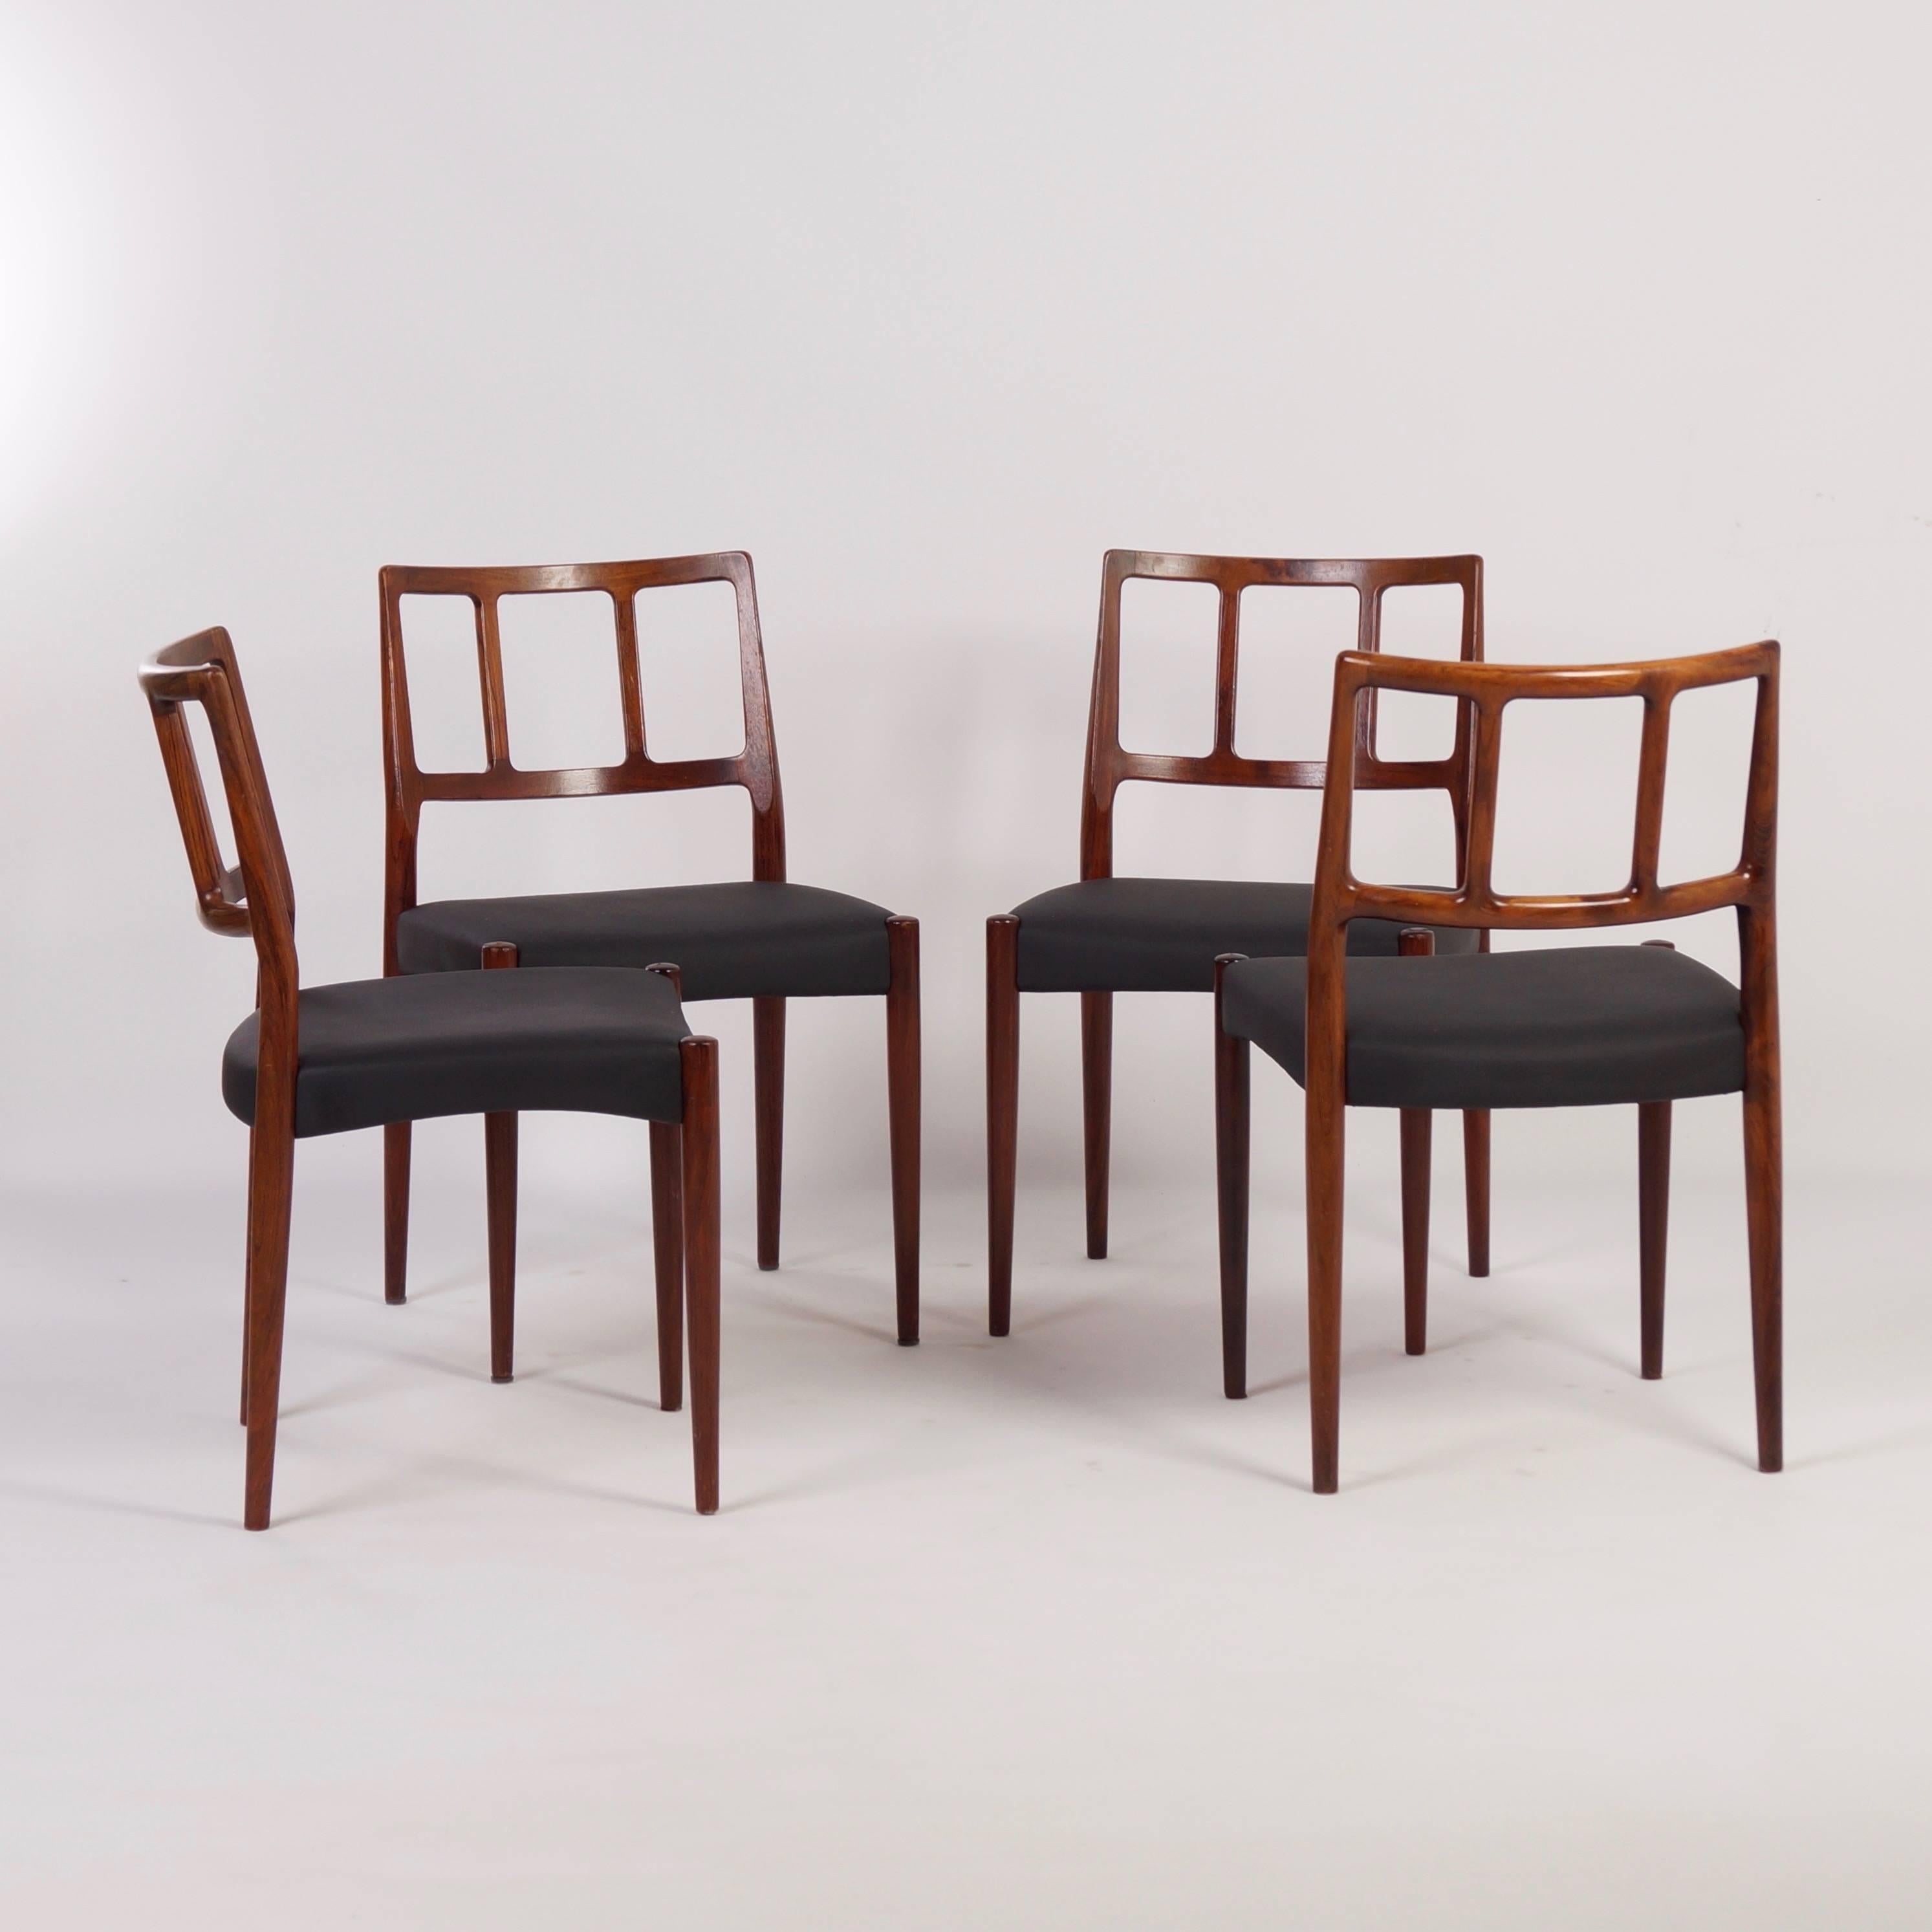 Beautiful set of four Danish dining chairs designed by Johannes Andersen for Uldum Møbelfabrik in about 1960. The chairs are very well made of rosewood with a very fine grain structure and beautiful wood grain connections. Considering its age these